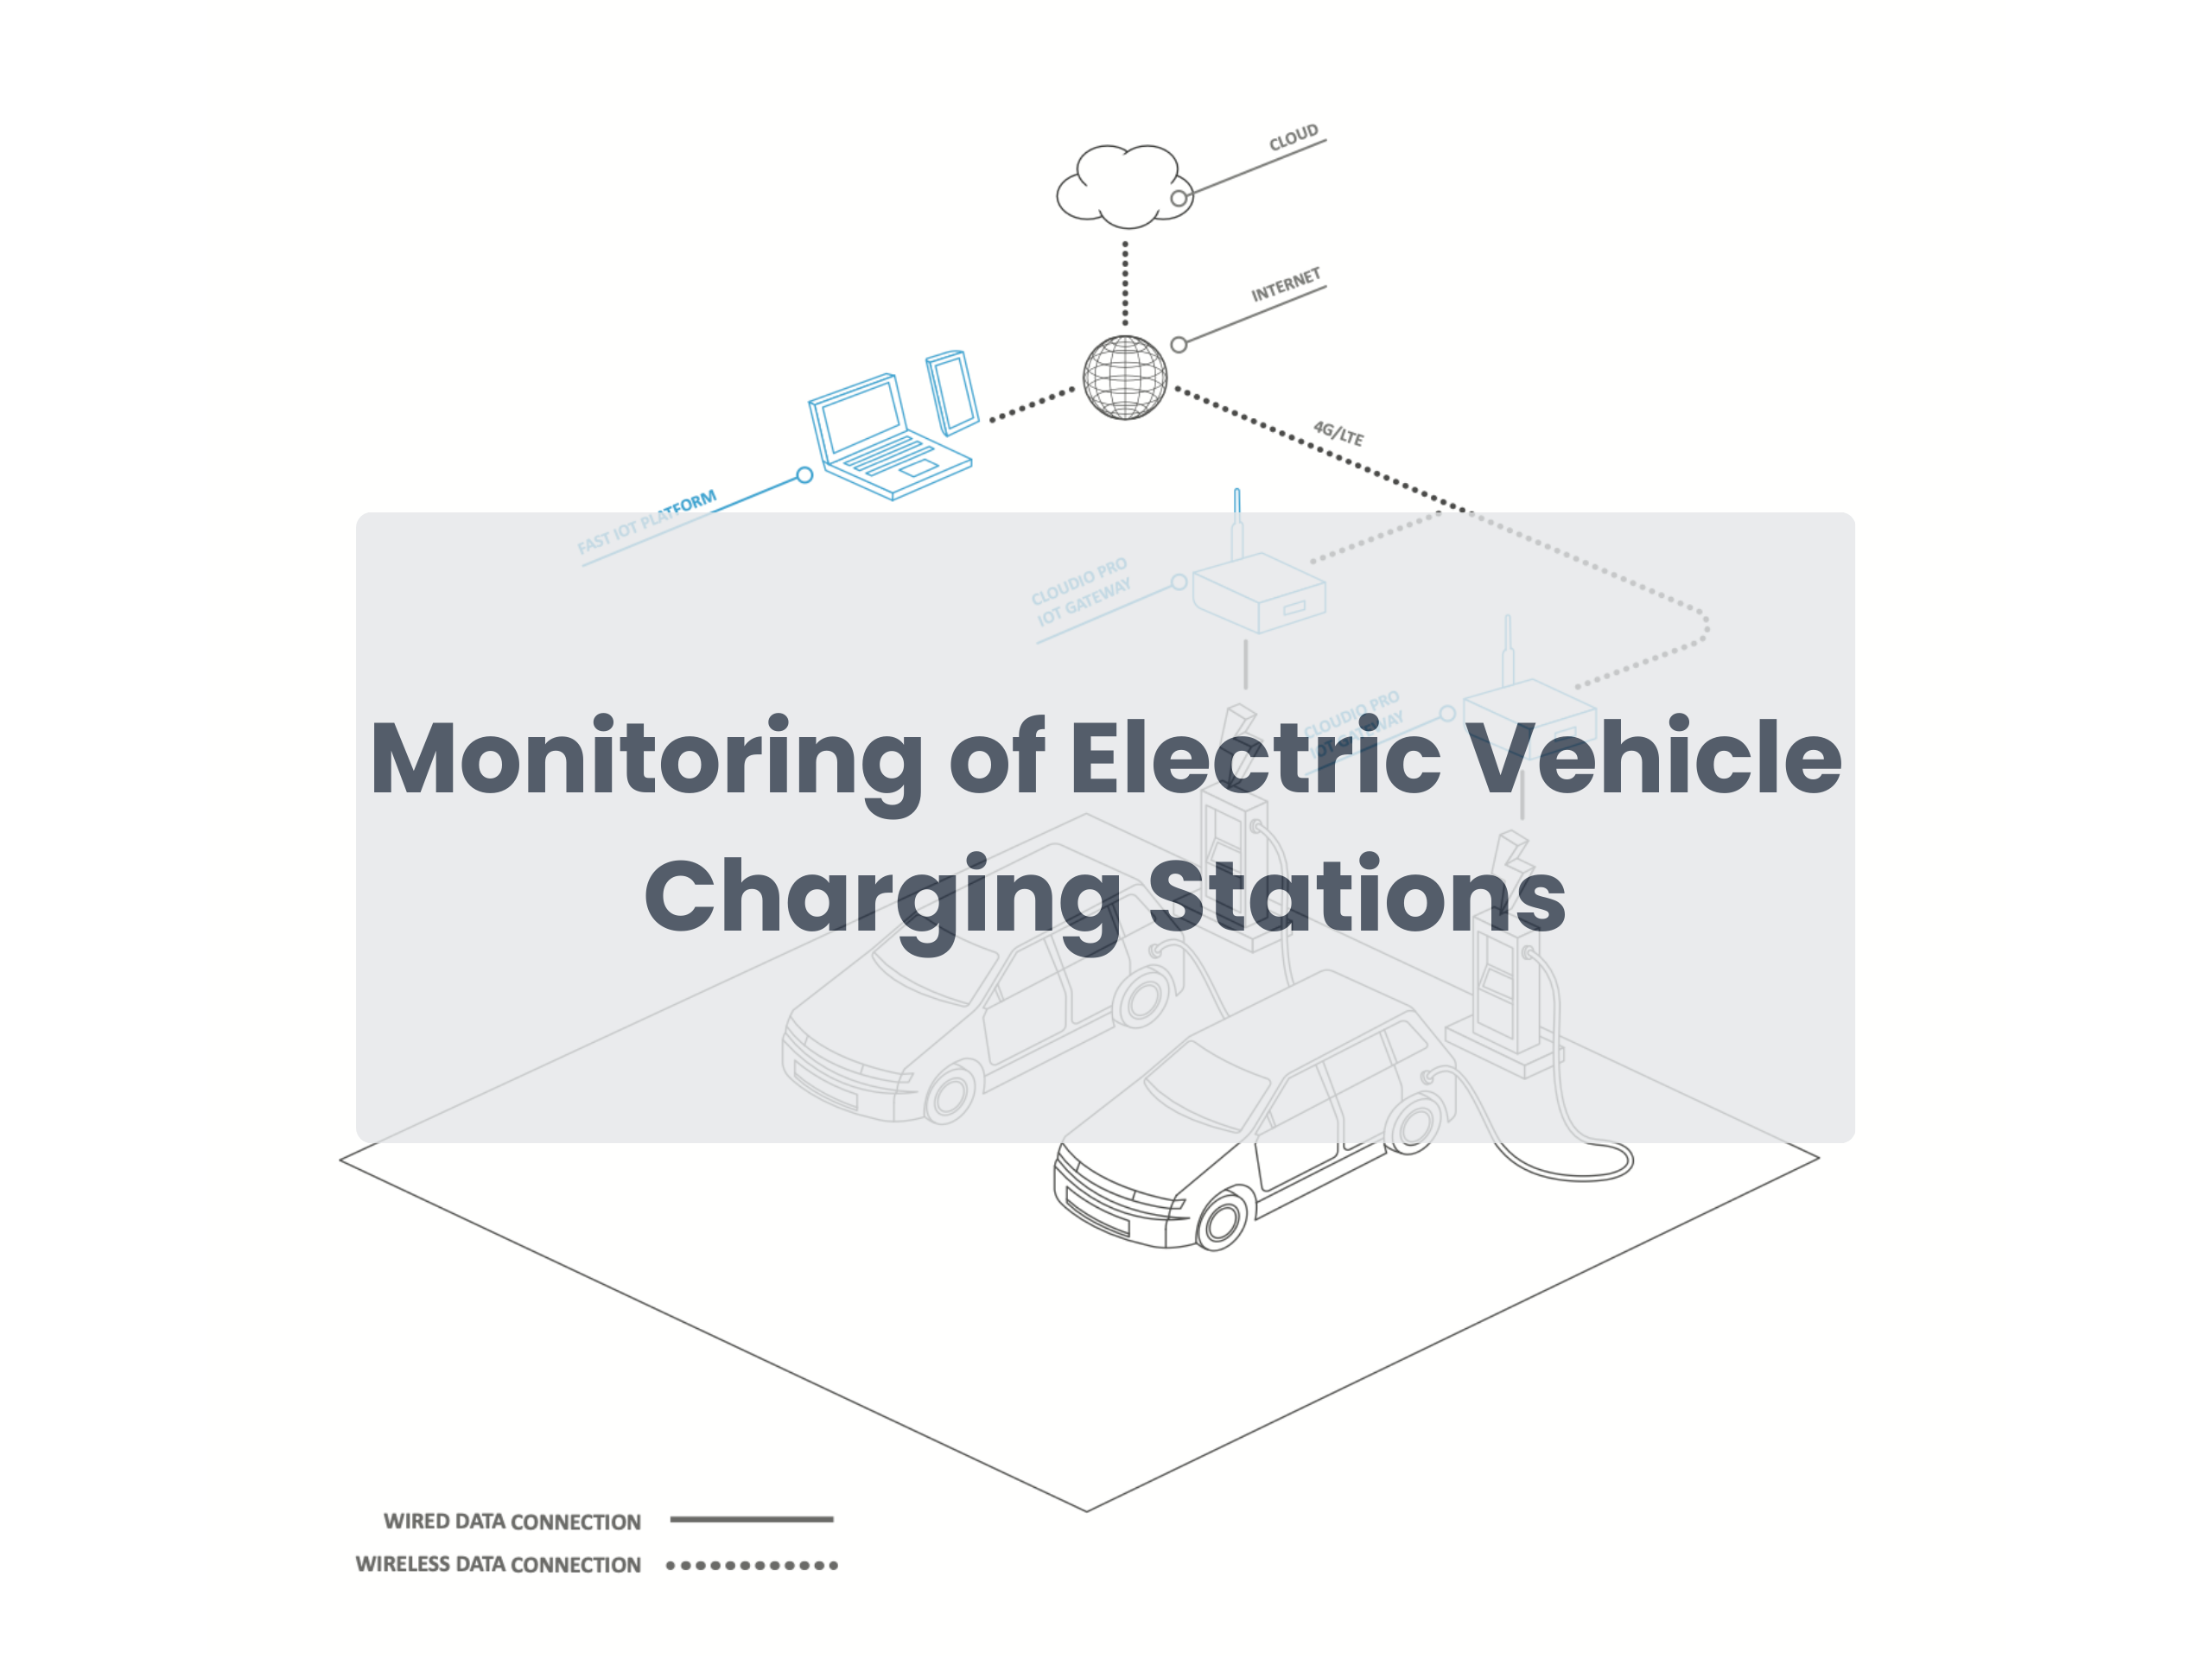 Monitoring of Electric Vehicle Charging Stations